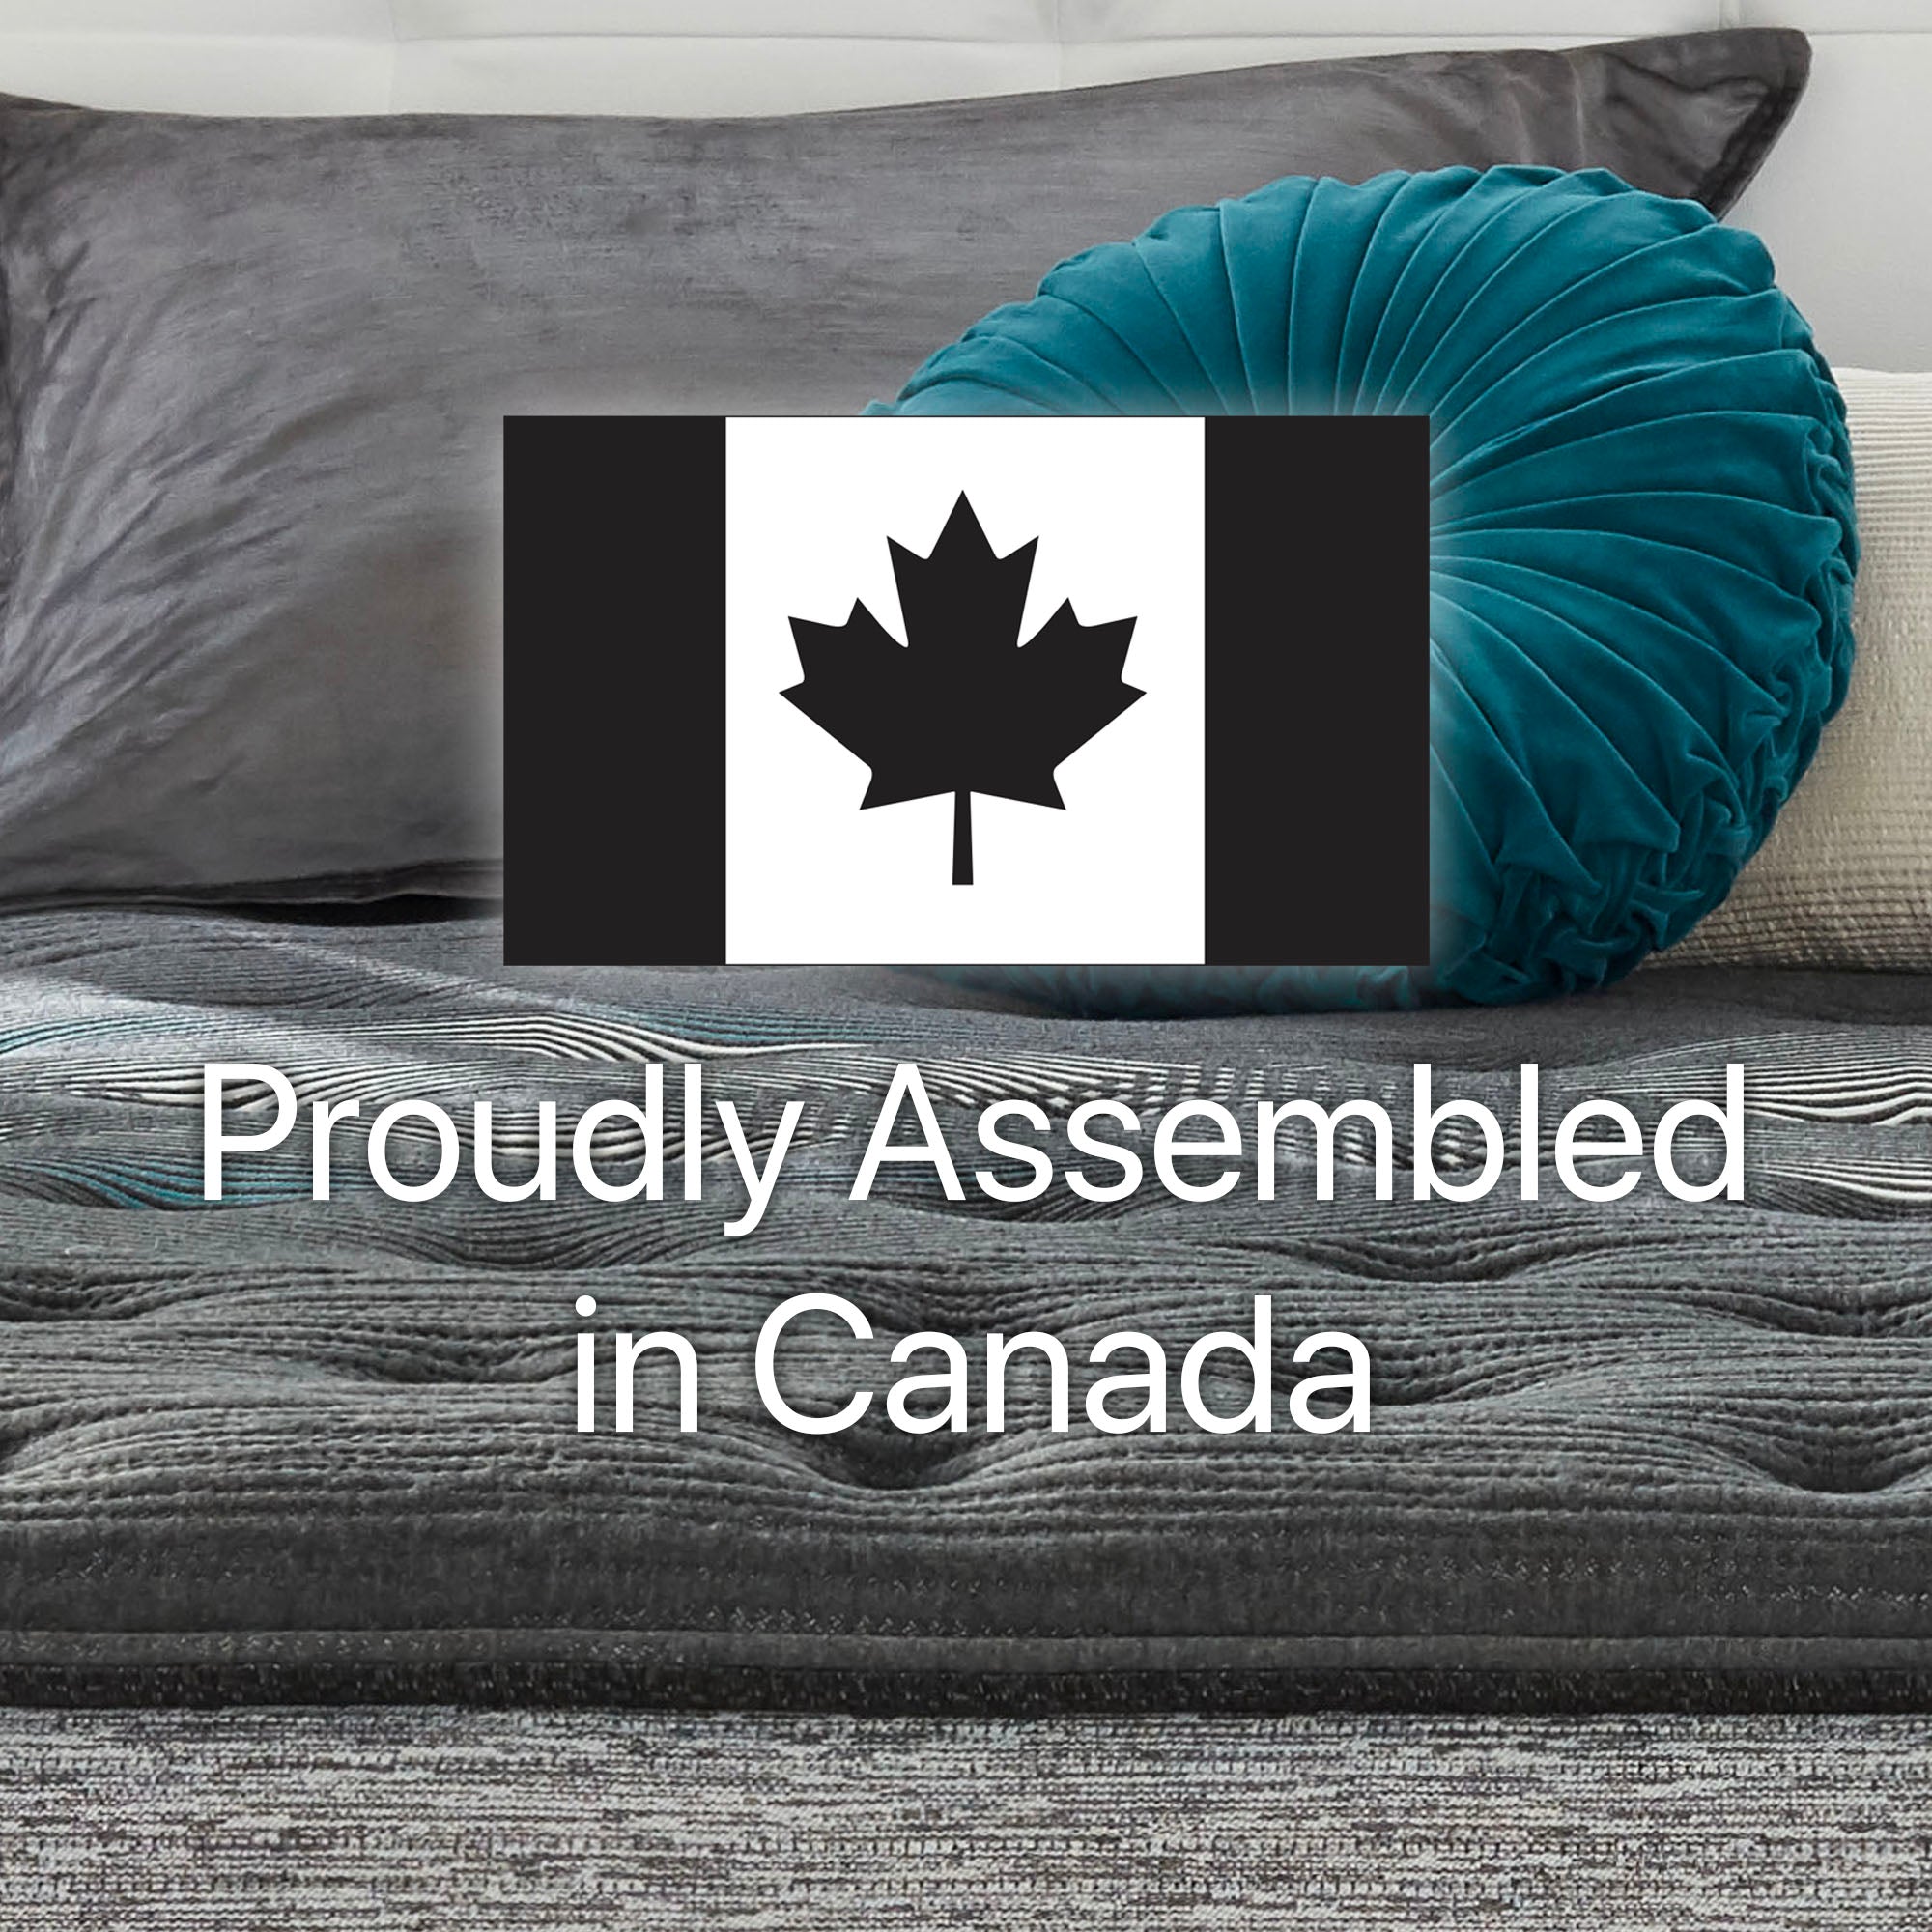 Beautyrest Made in Canada